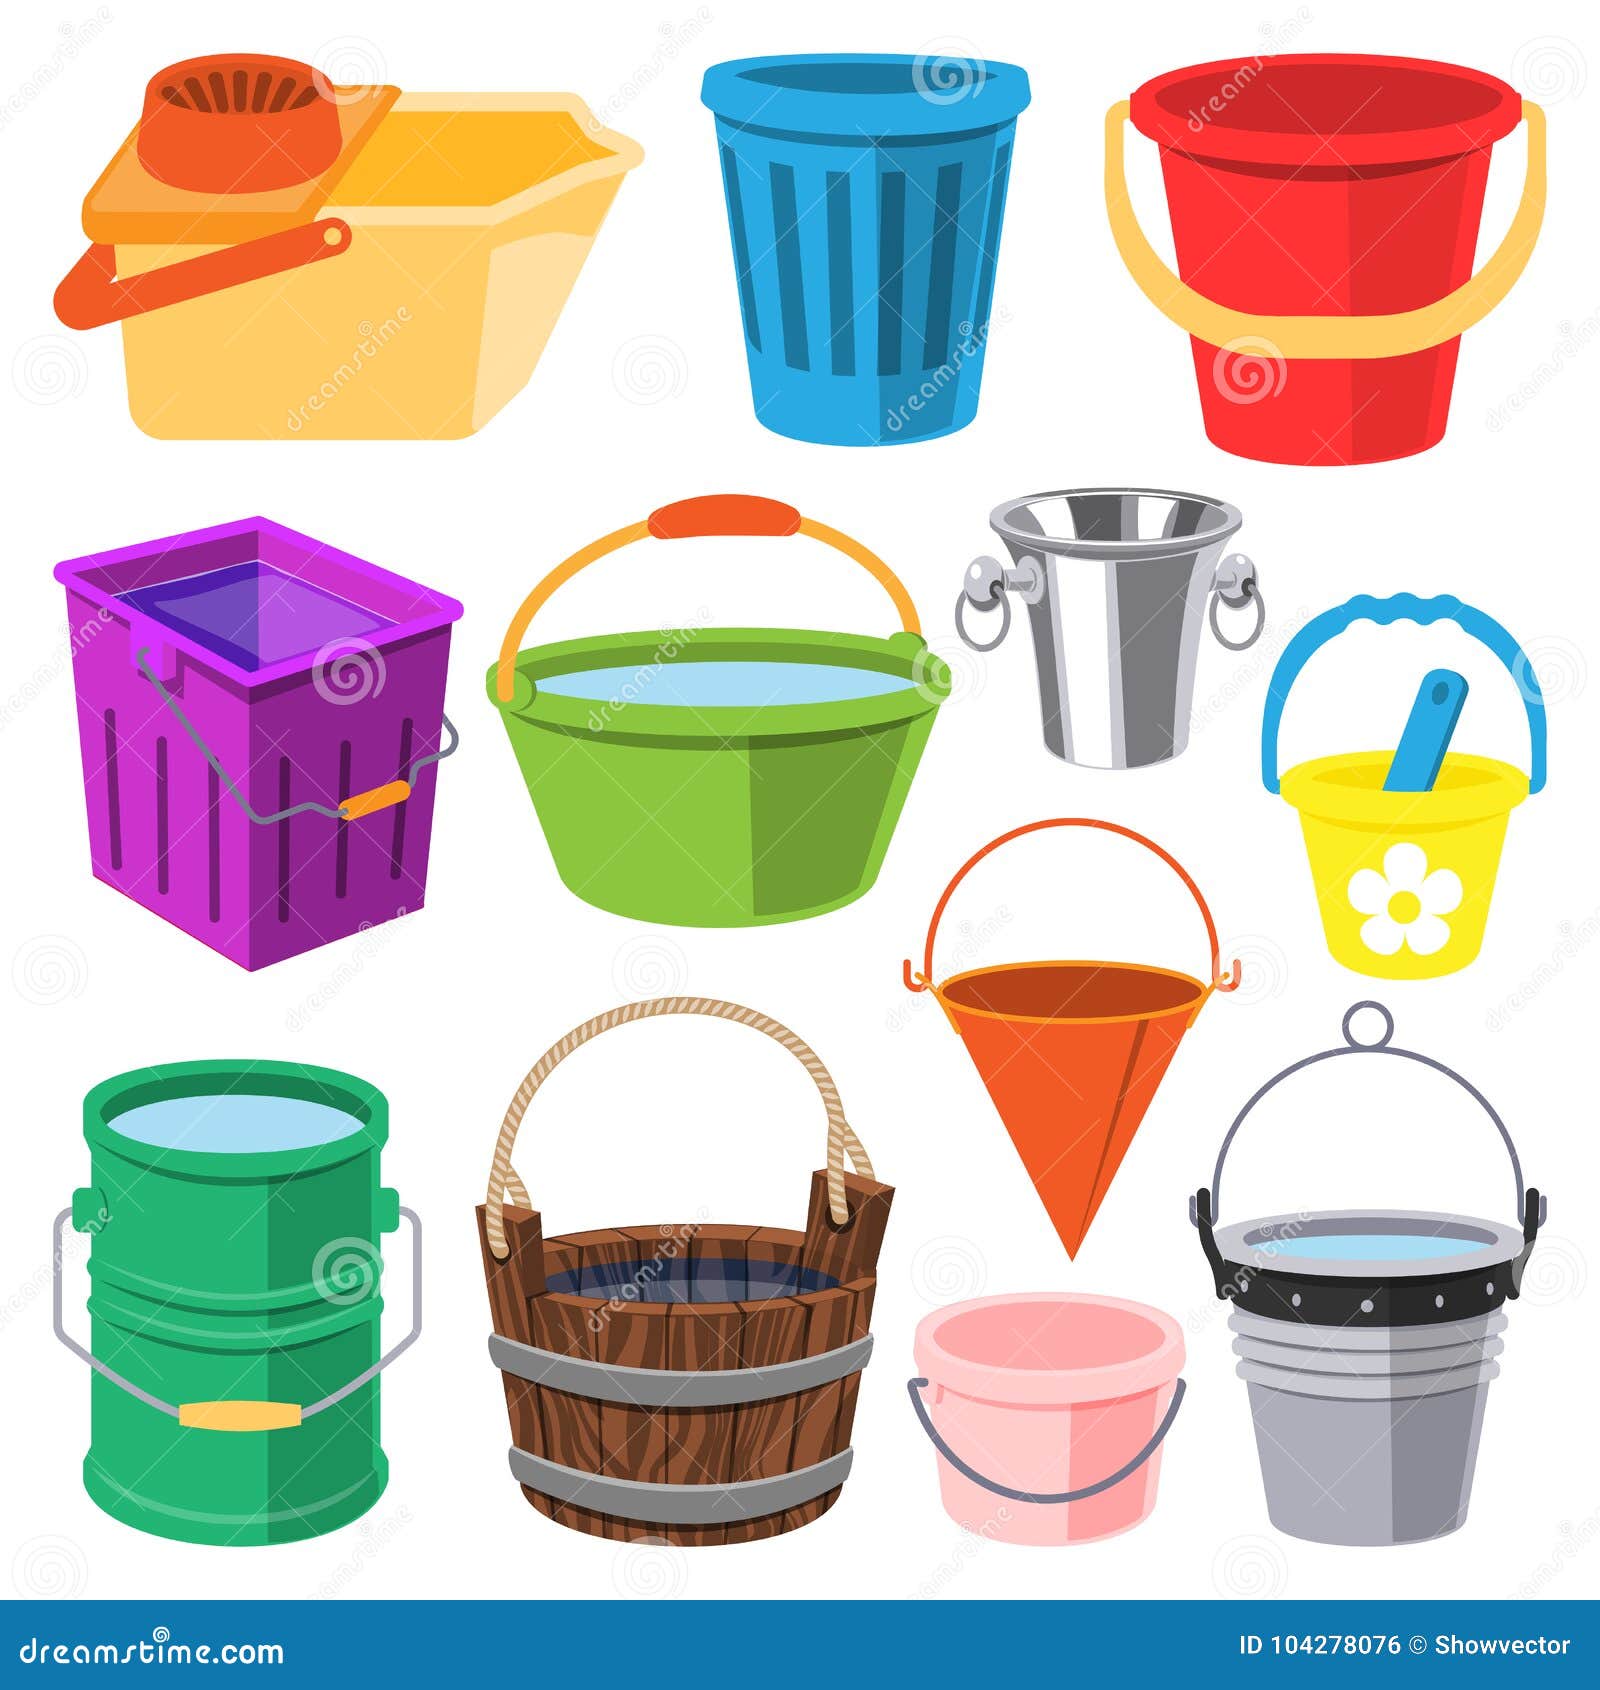 Plastic Blue Bucket With Water For Household Cleaning And Home